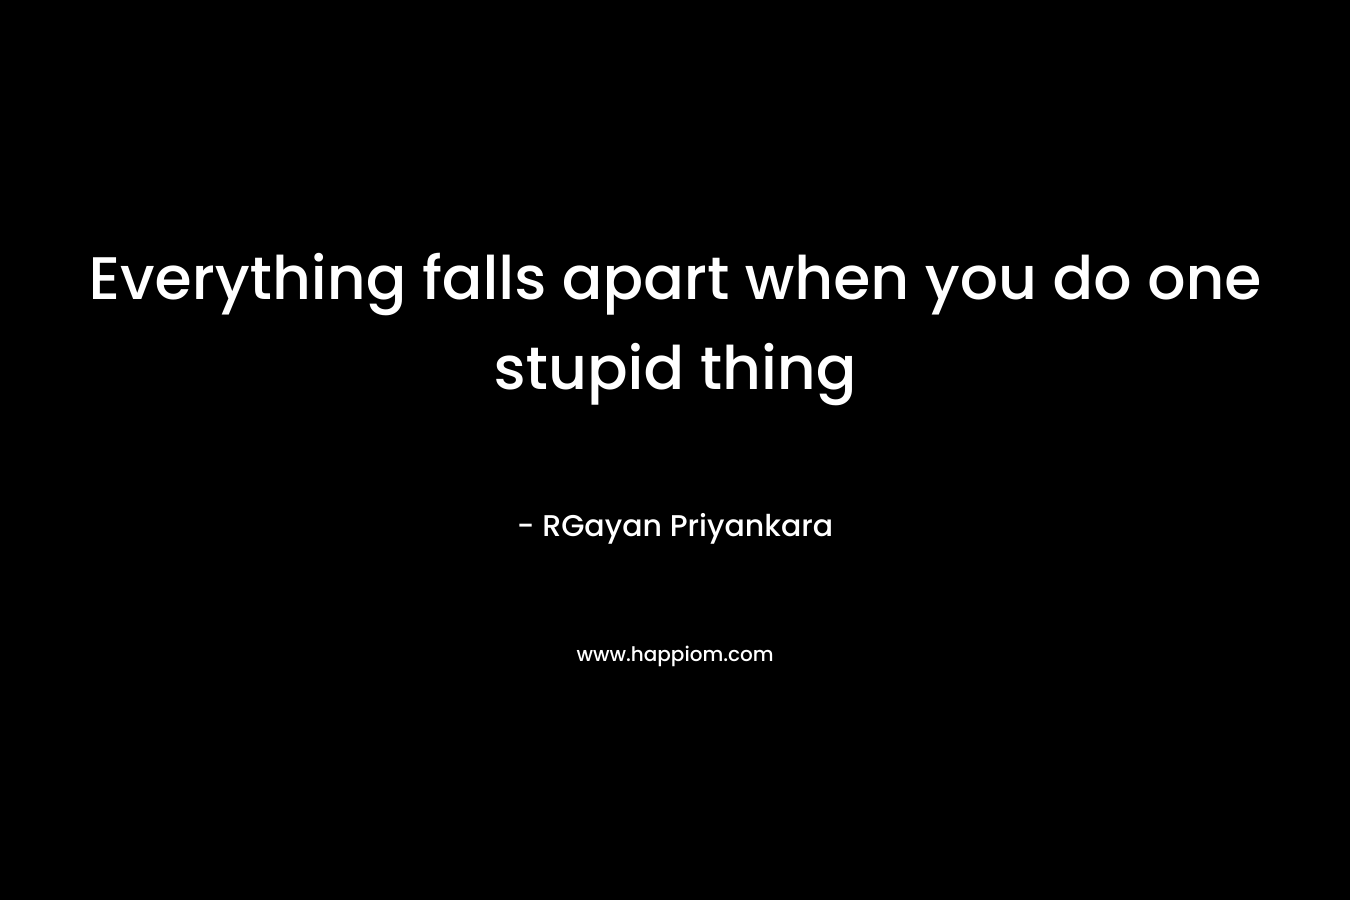 Everything falls apart when you do one stupid thing